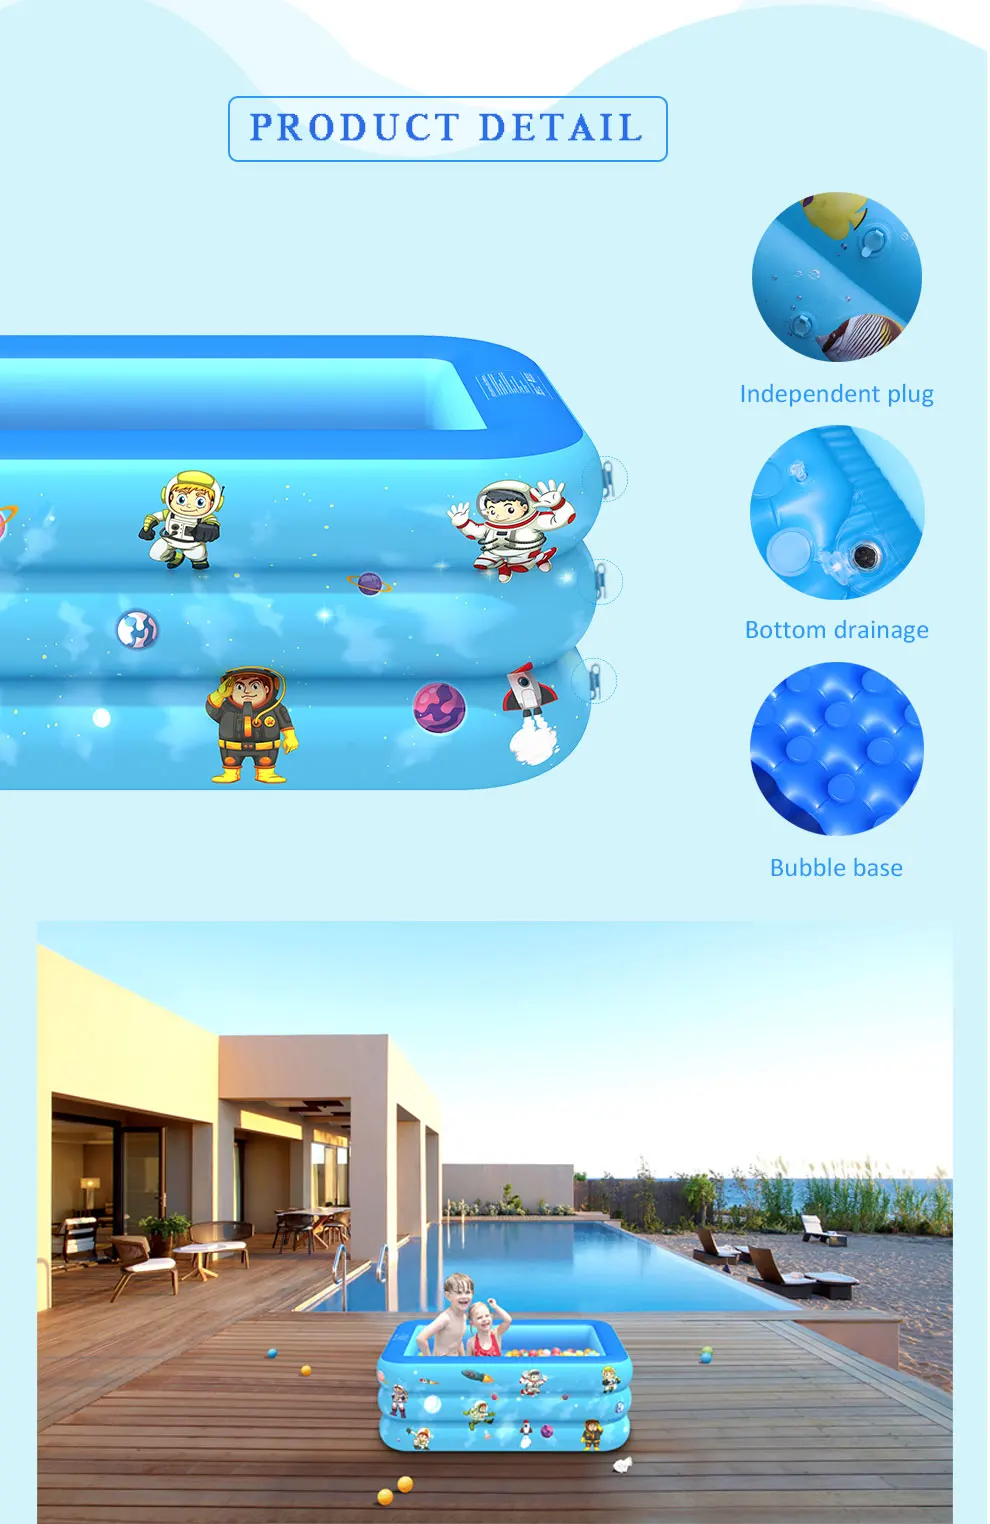 Inflation water pool pumped ball pool